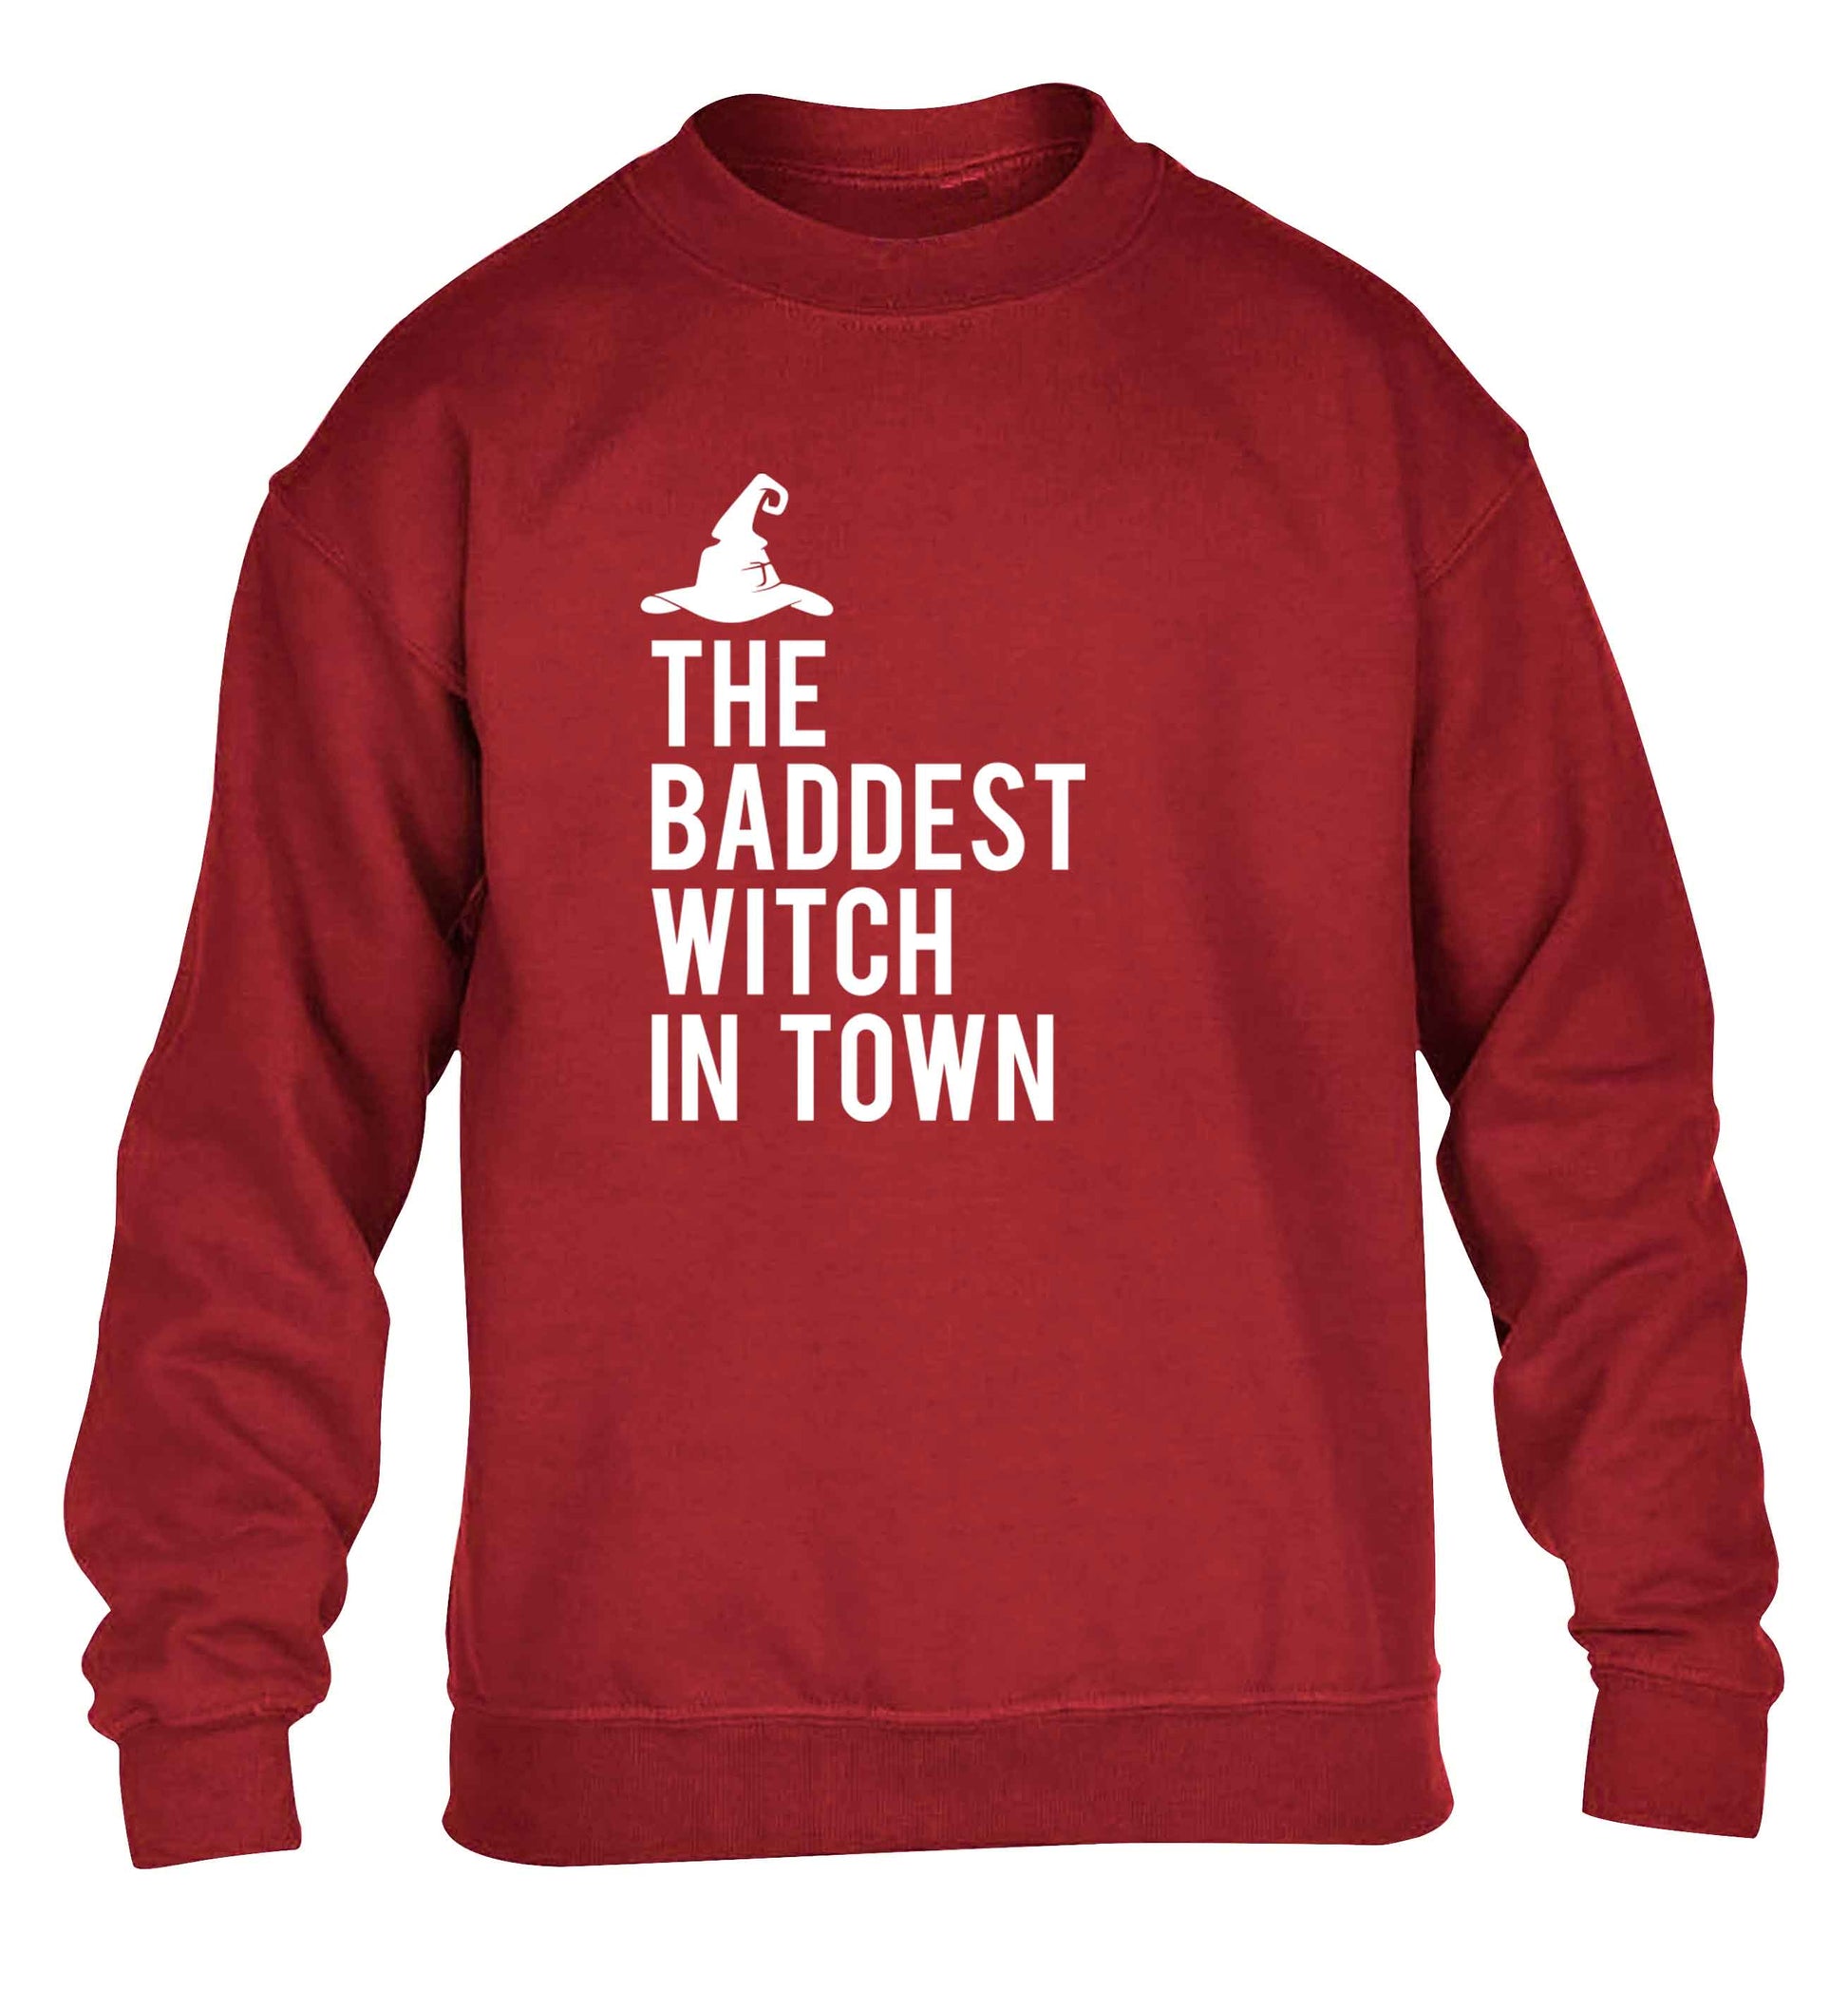 Badest witch in town children's grey sweater 12-13 Years